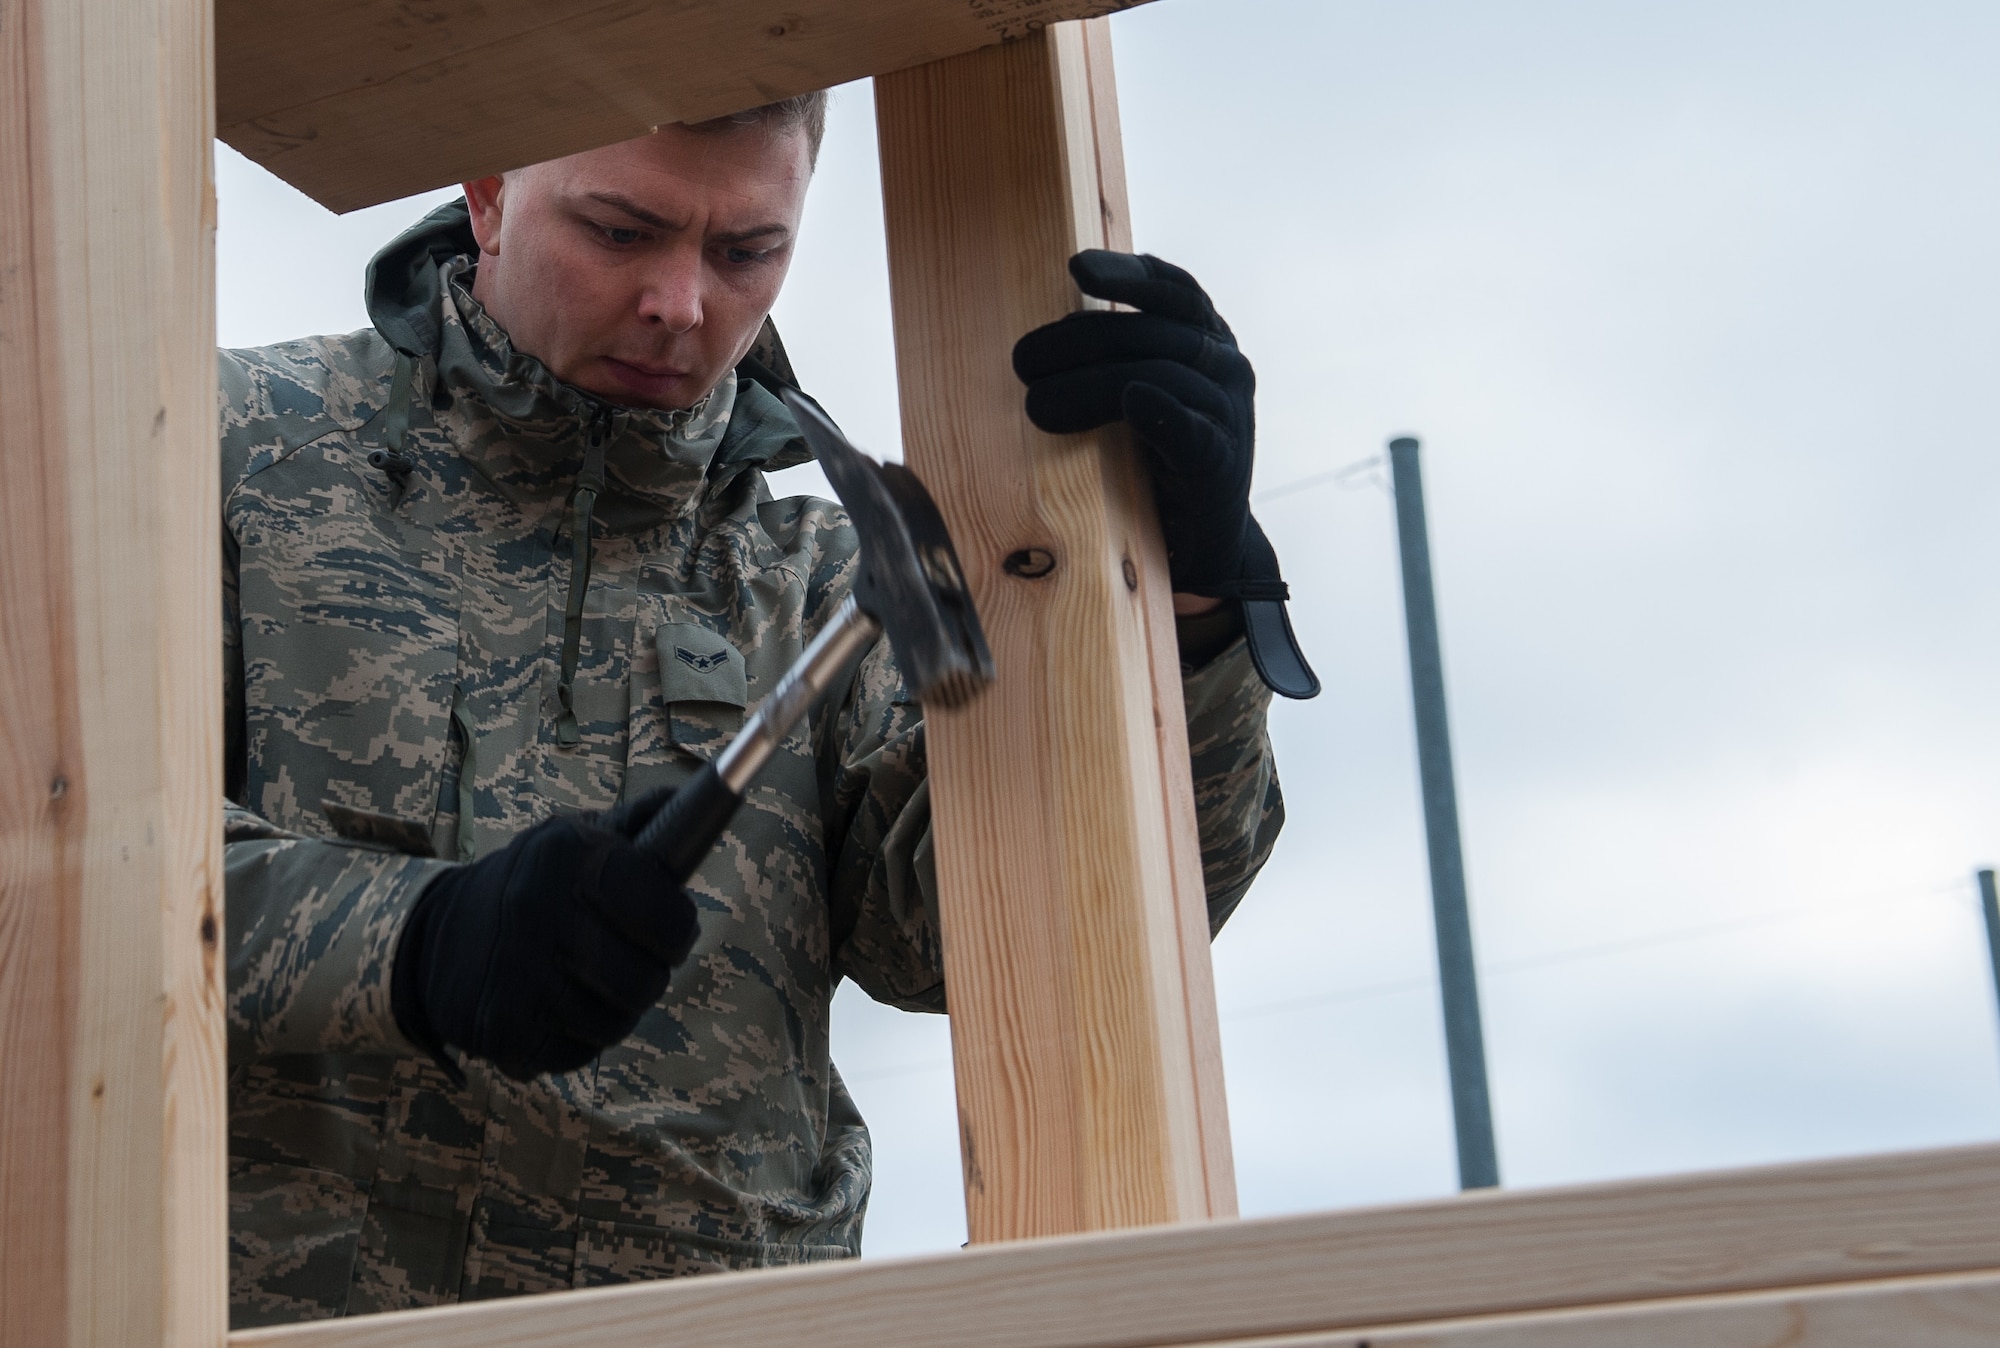 Airman 1st Class David Osborne, 86th Logistic Readiness Squadron traffic management journeyman, constructs palettes together during an 86th Munitions Squadron exercise at Ramstein Air Base, Germany, Oct. 25, 2016. Wooden frames are built after the pallets are cut the right length, and then are braced against the shipping containers for maximum protection against damage to the equipment it’s braced with. (U.S. Air Force photo by Airman 1st Class Lane T. Plummer)